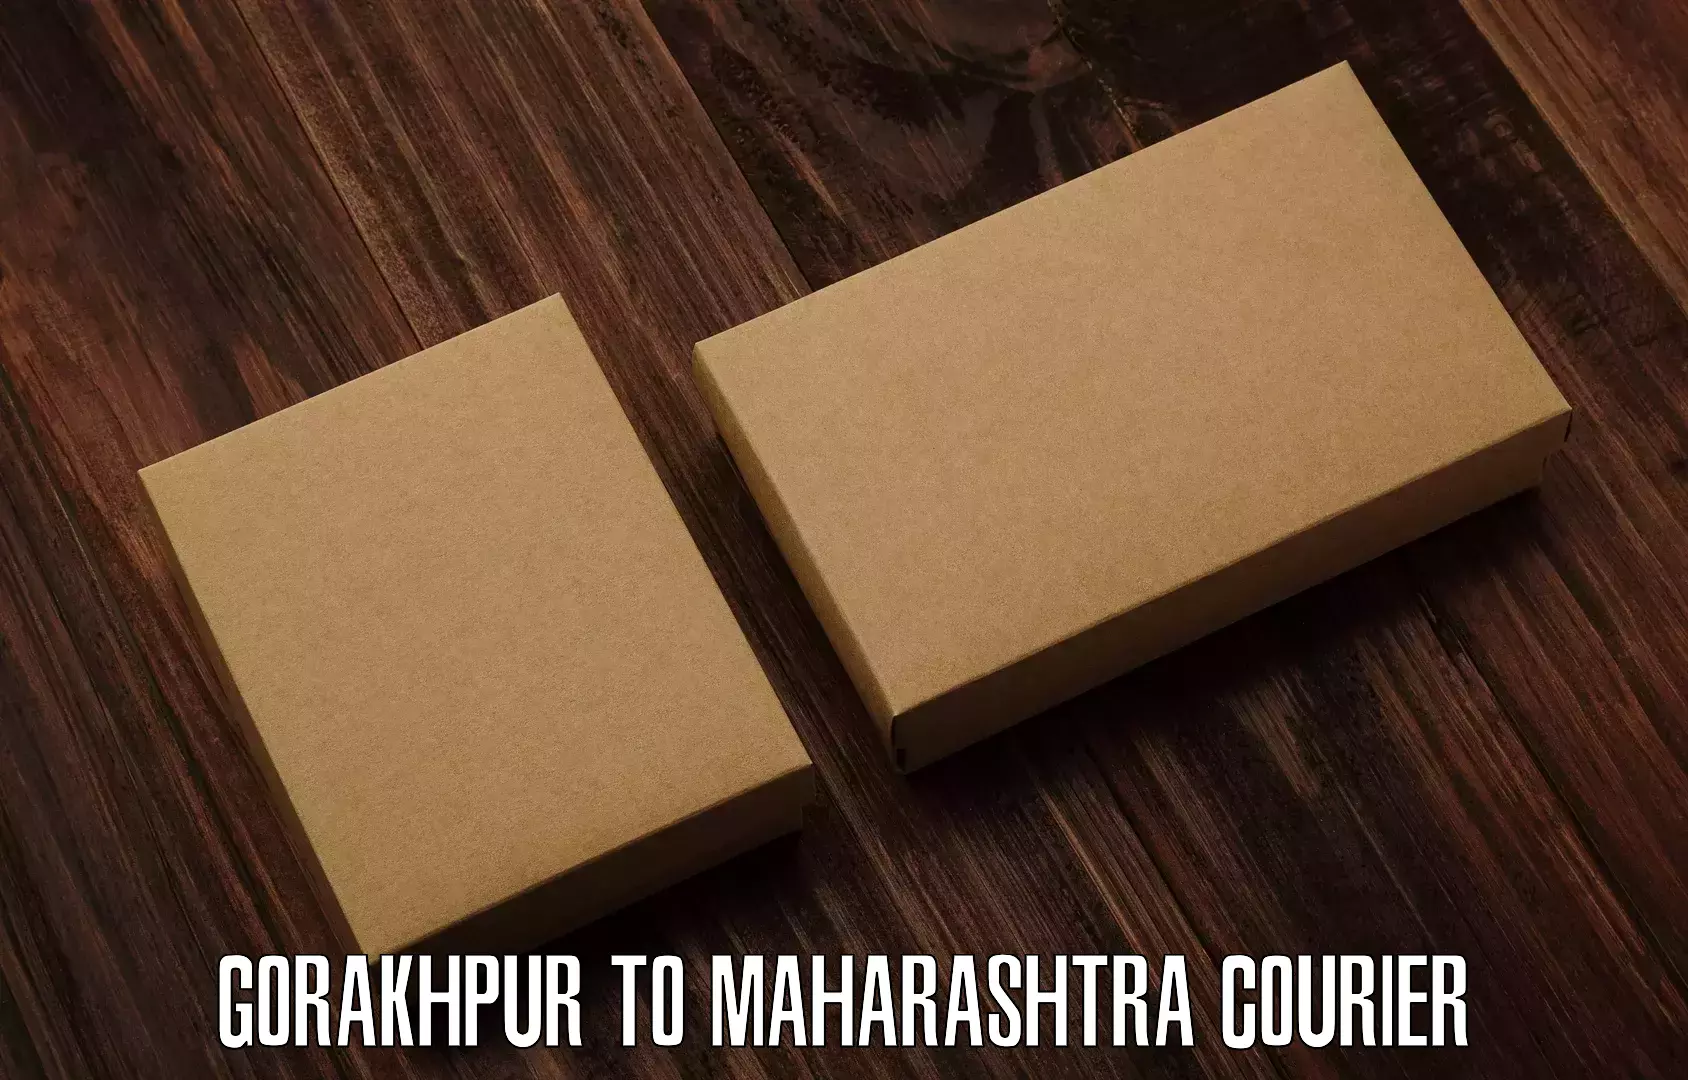 Same-day delivery solutions Gorakhpur to Shirpur